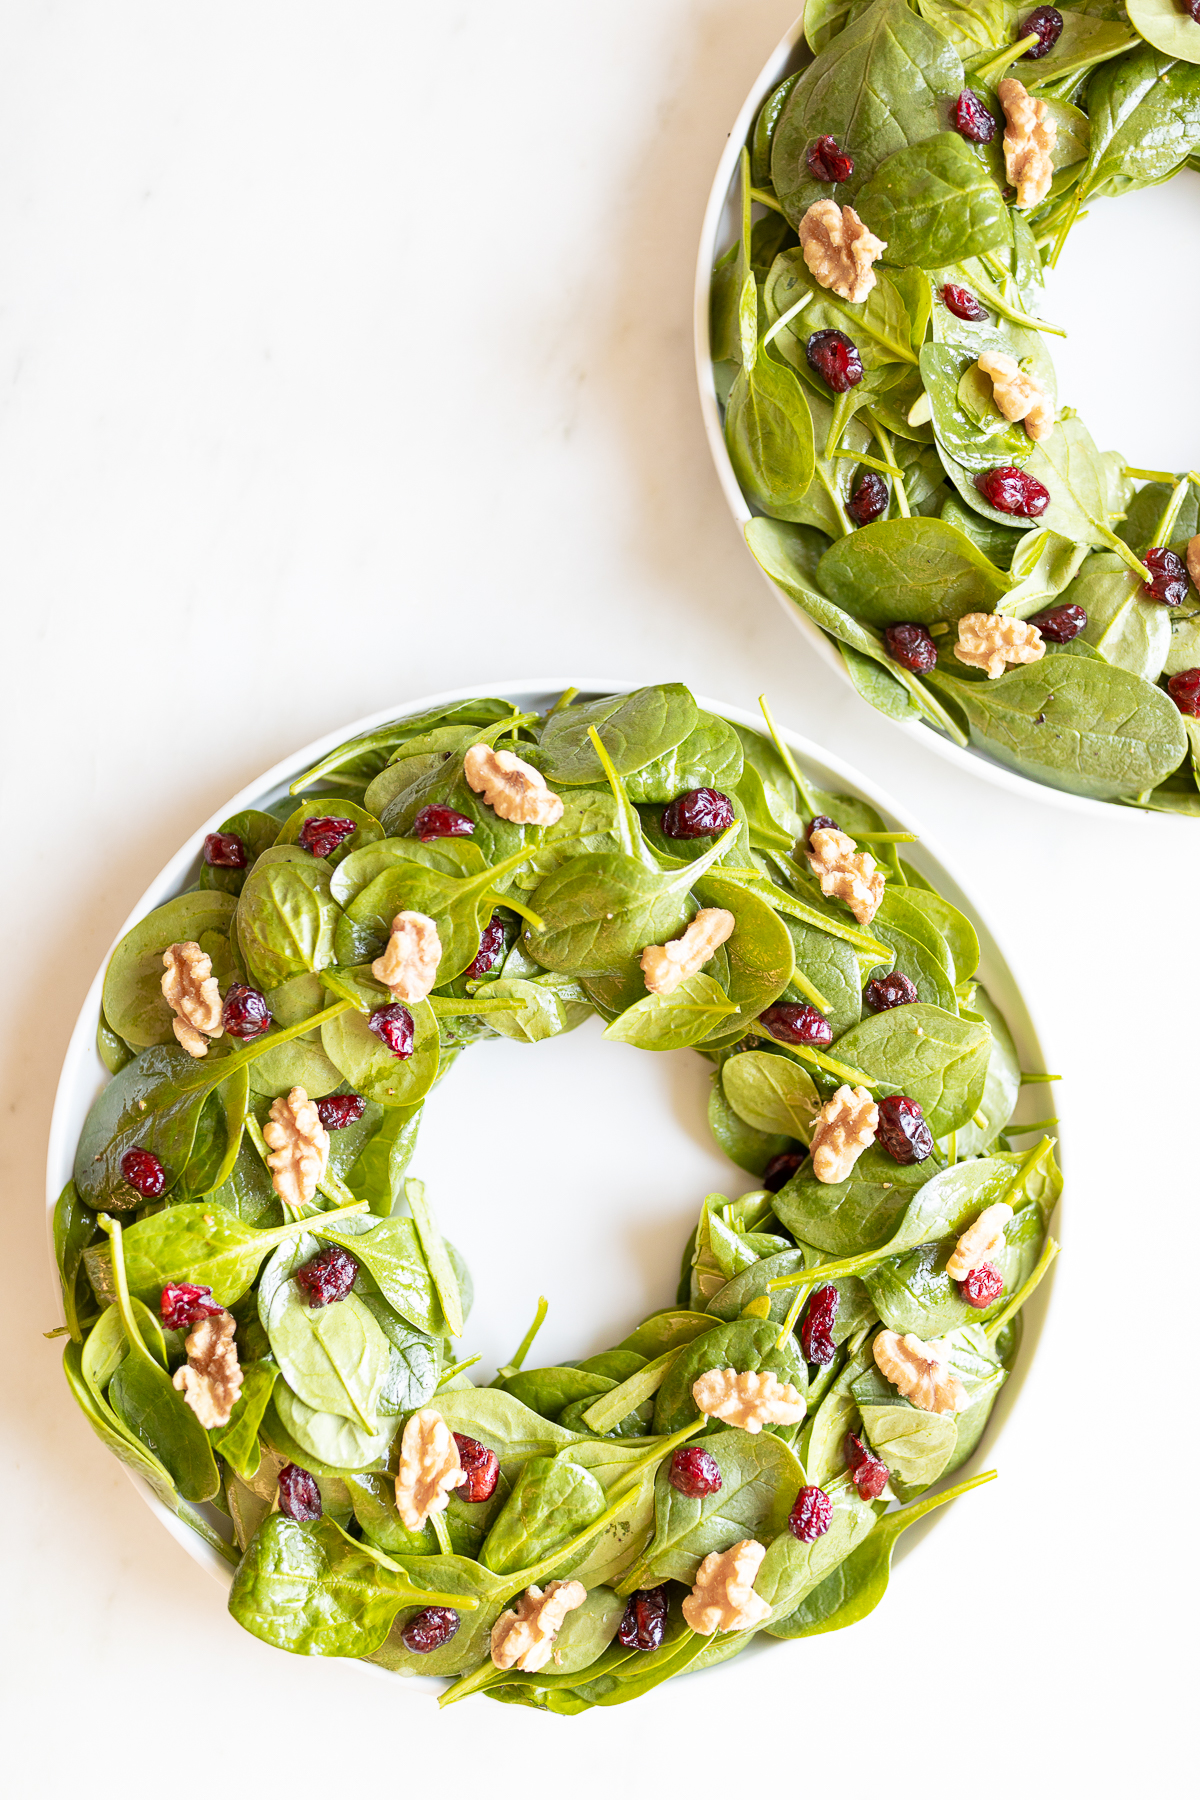 A festive Christmas salad, featuring two plates of spinach and cranberries arranged in the shape of a beautiful wreath.